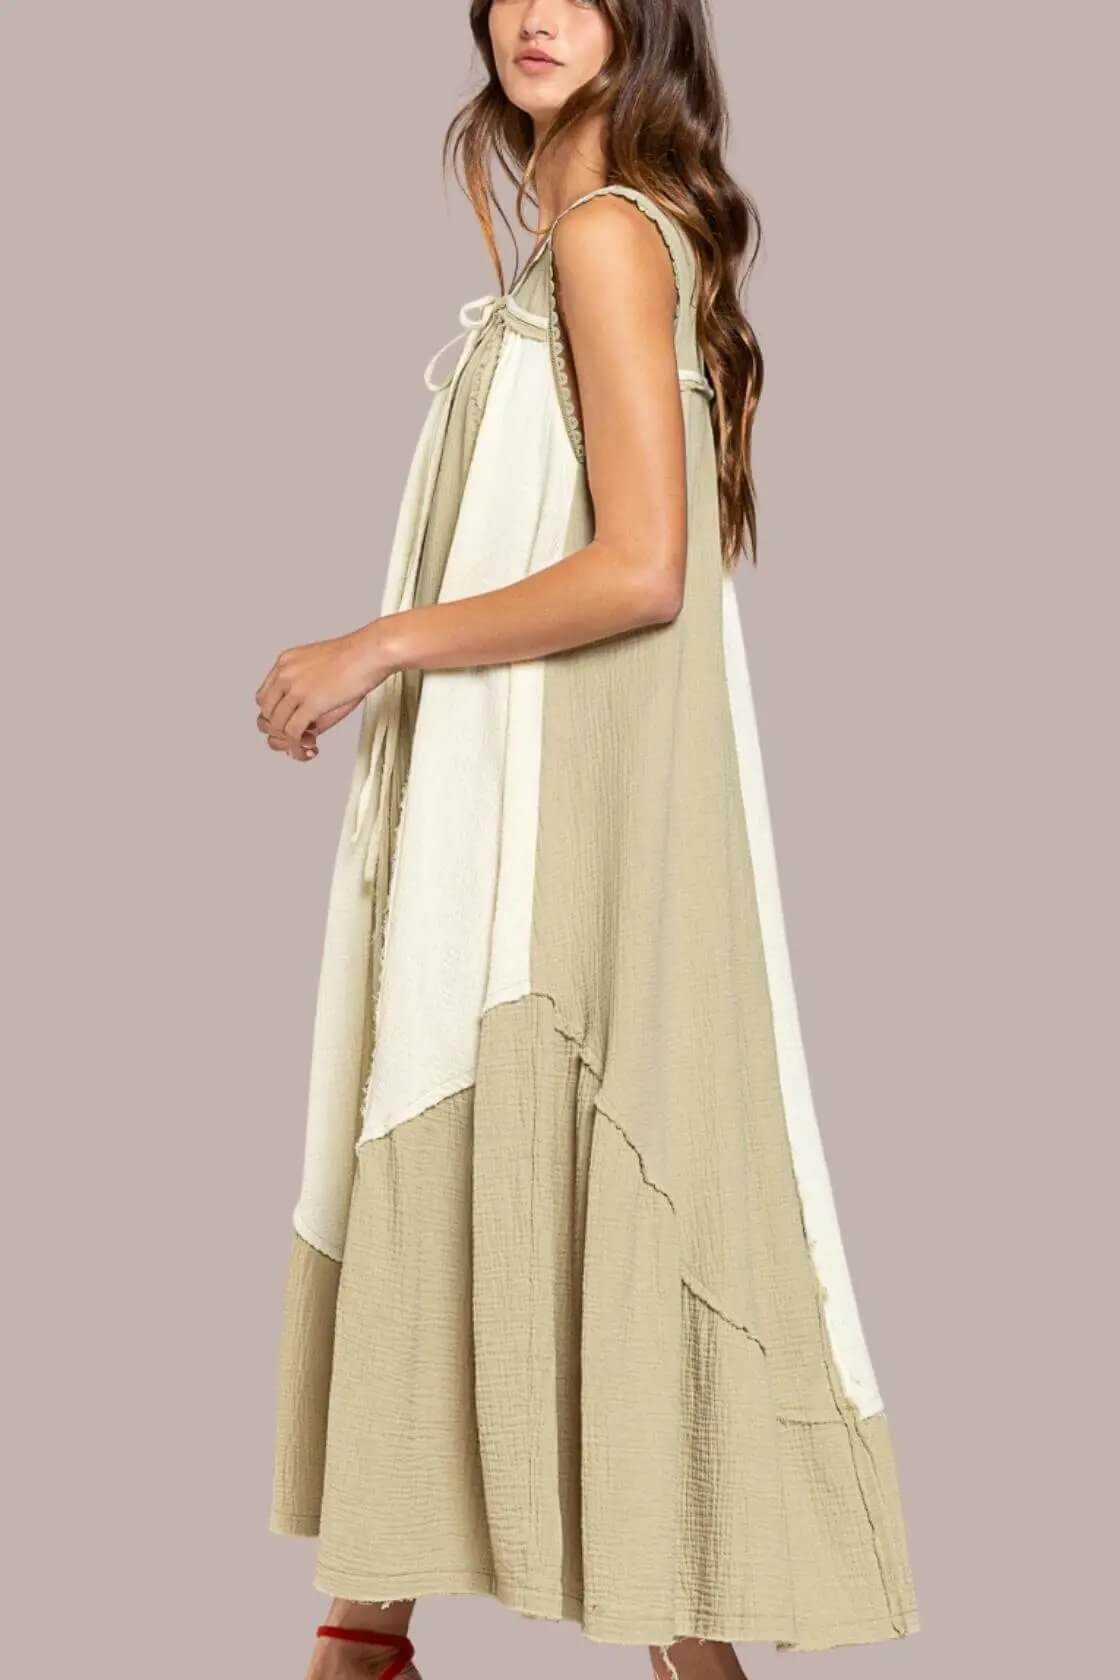 Matcha Latte Sleeveless Midi Dress with Contrast Color - Rocca & Co